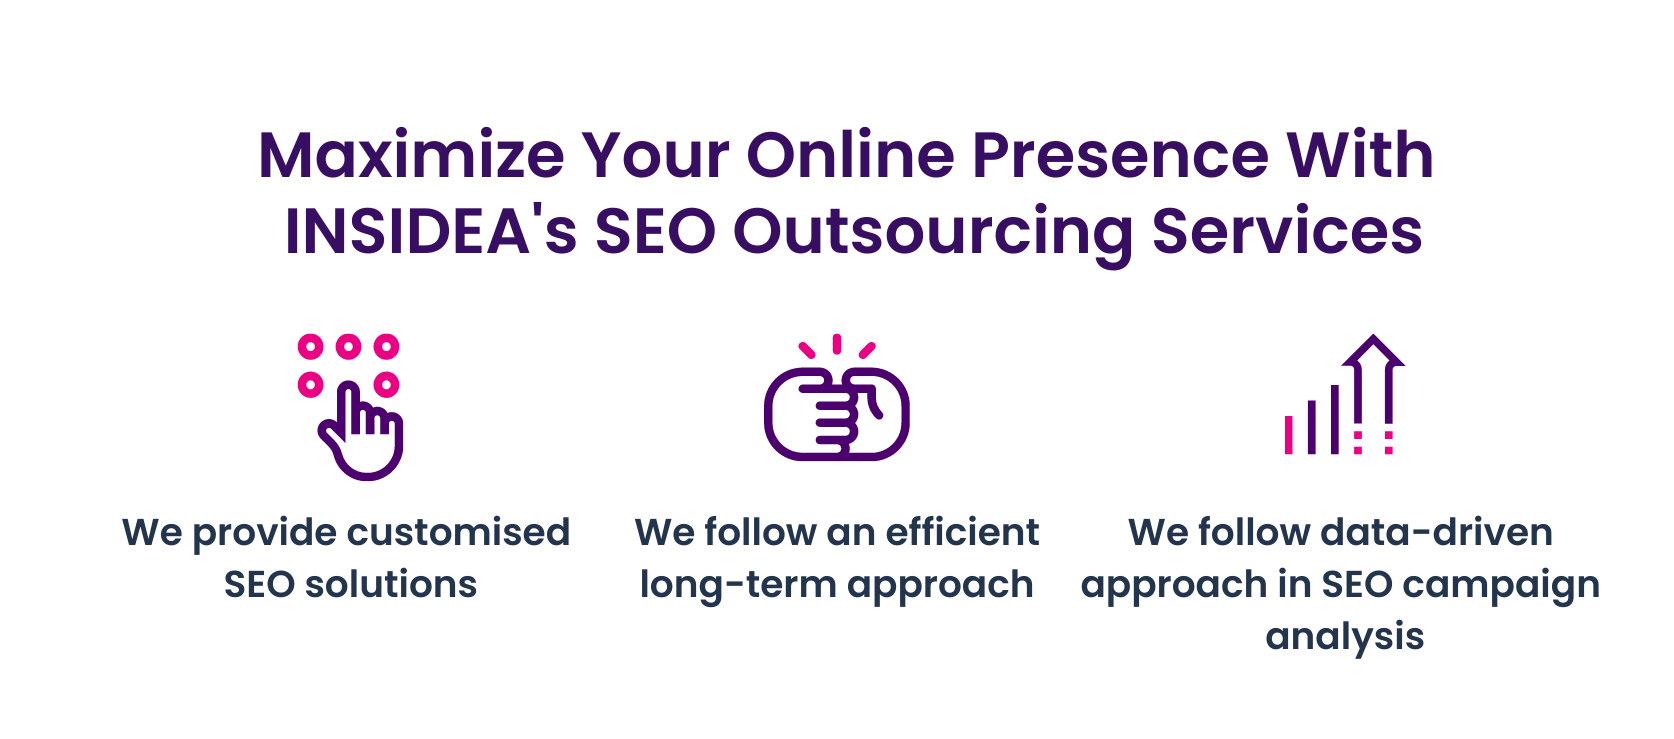 Maximize your online presence with INSIDEA'S SEO outsourcing services